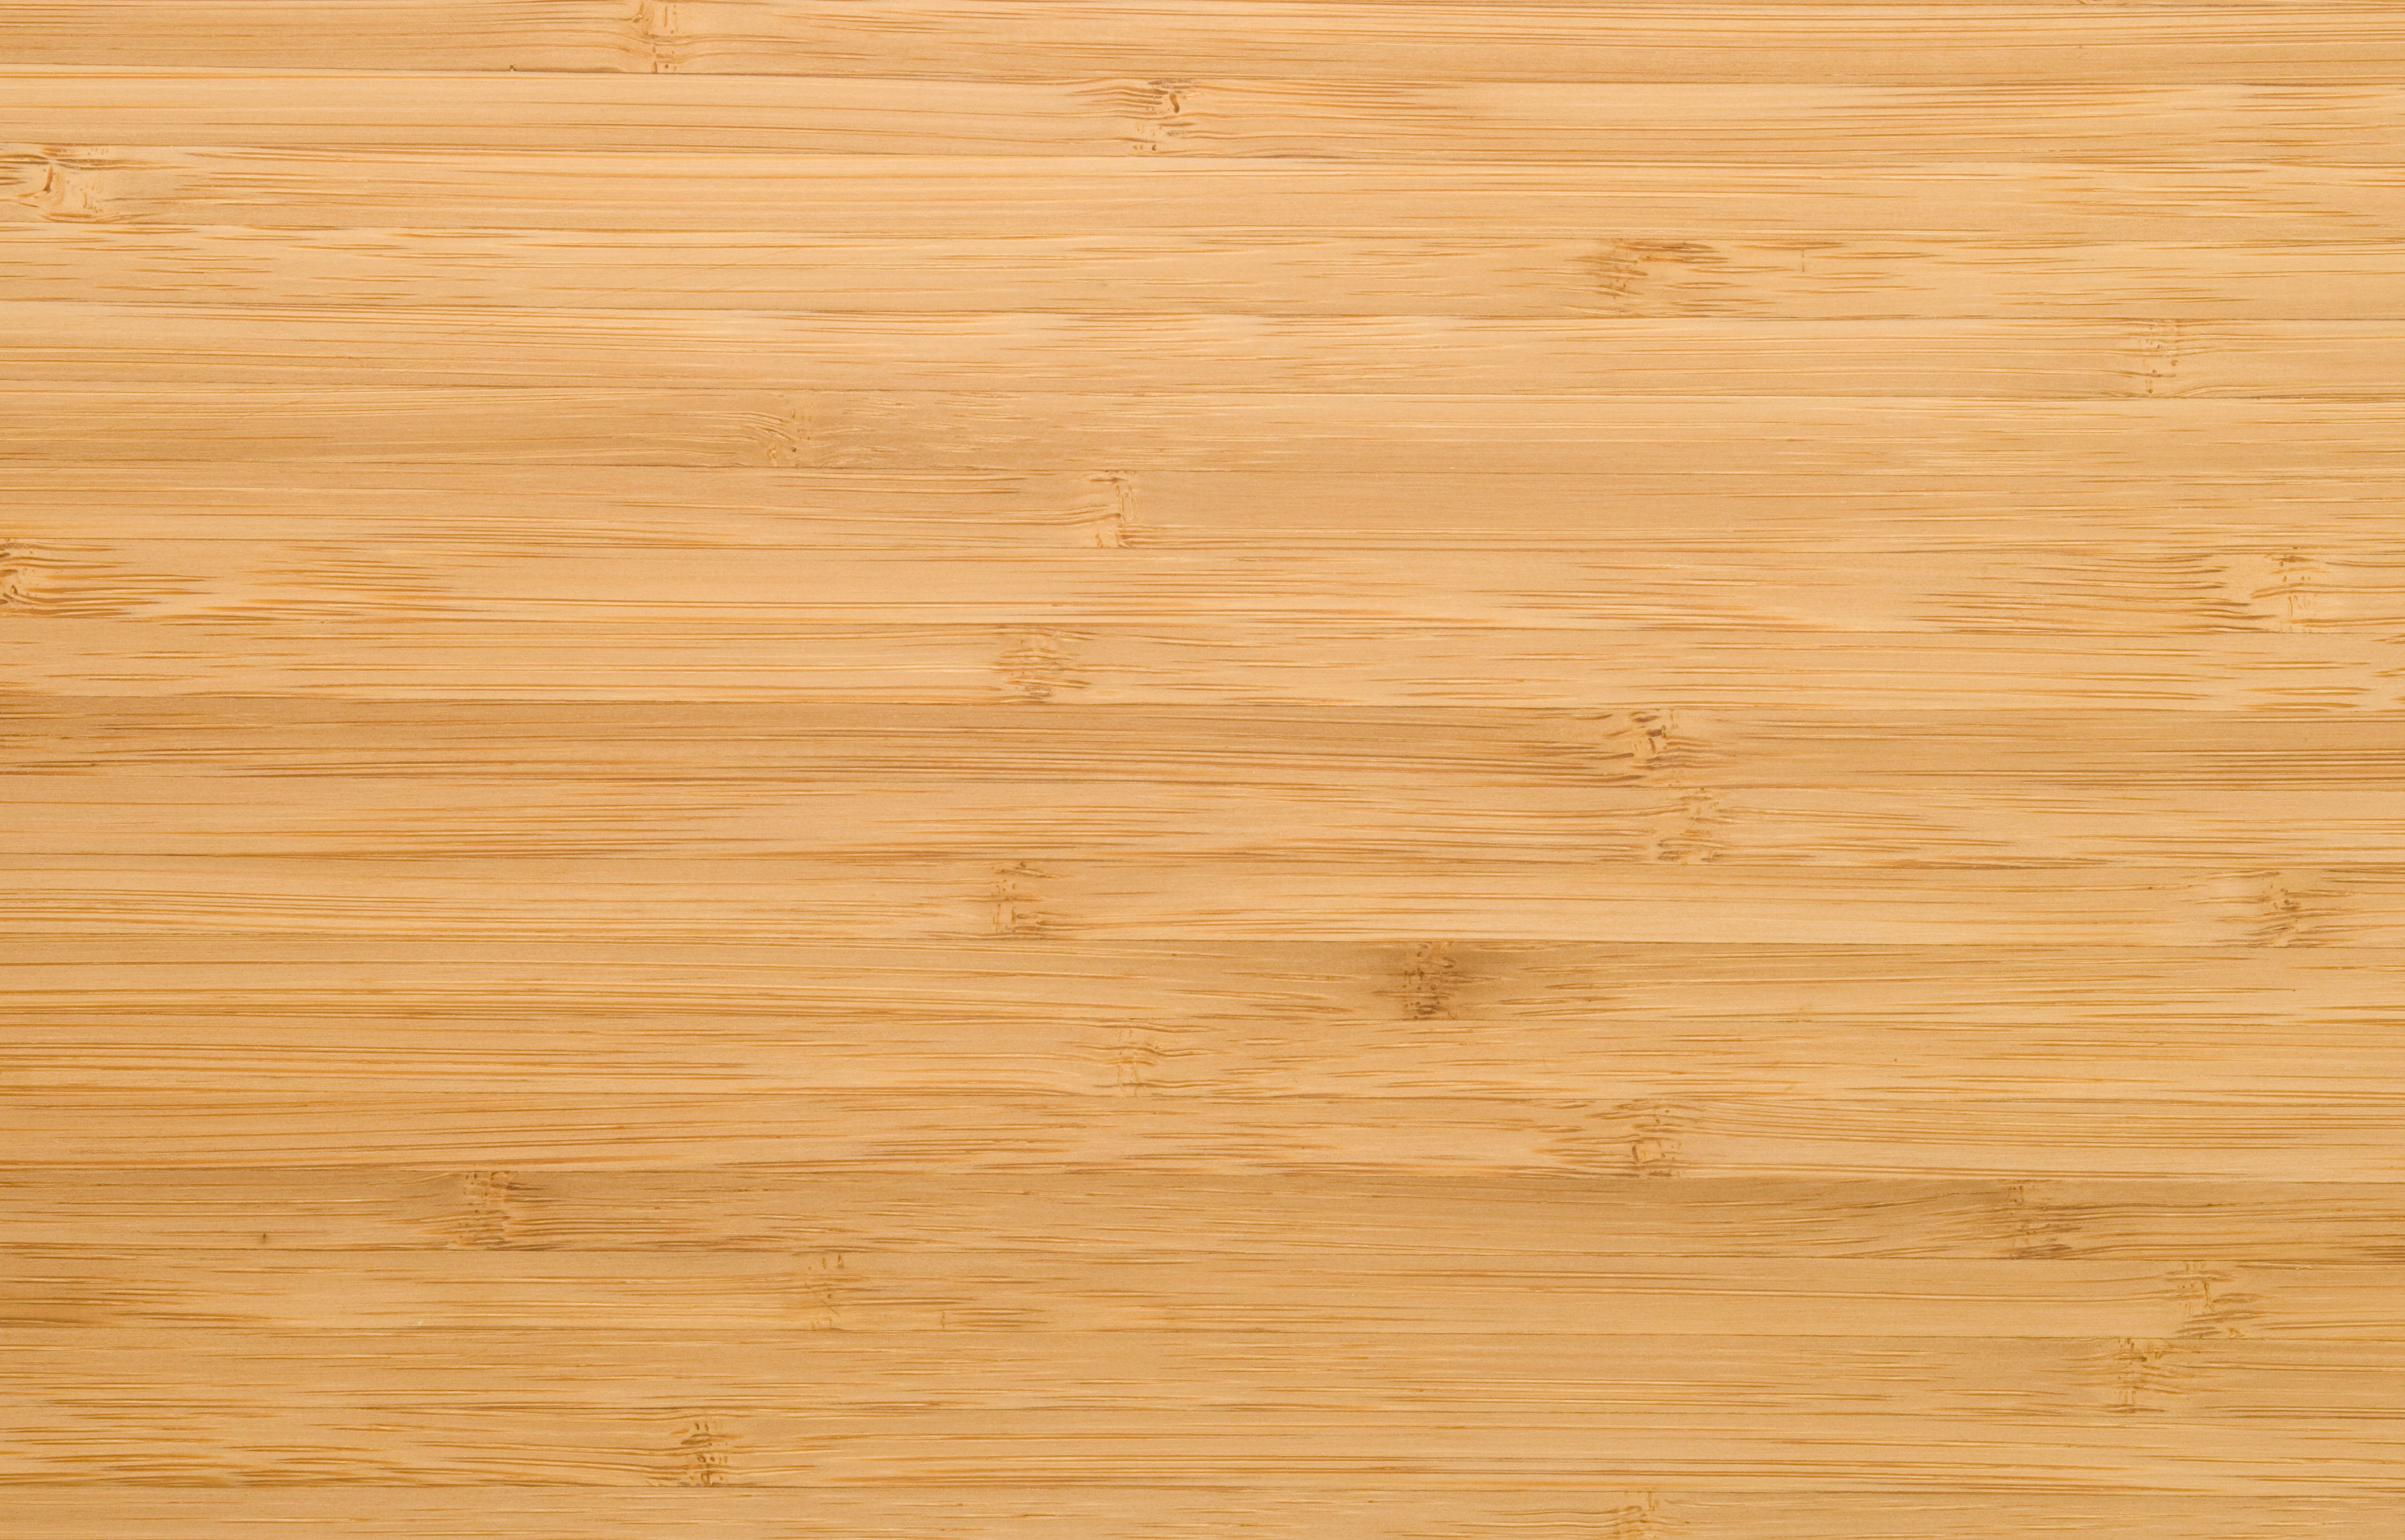 29 attractive Hardwood Floor Cleaning Service Cost 2024 free download hardwood floor cleaning service cost of can you use a wet mop on bamboo floors in natural bamboo plank 94259870 59aeefd4519de20010d5c648